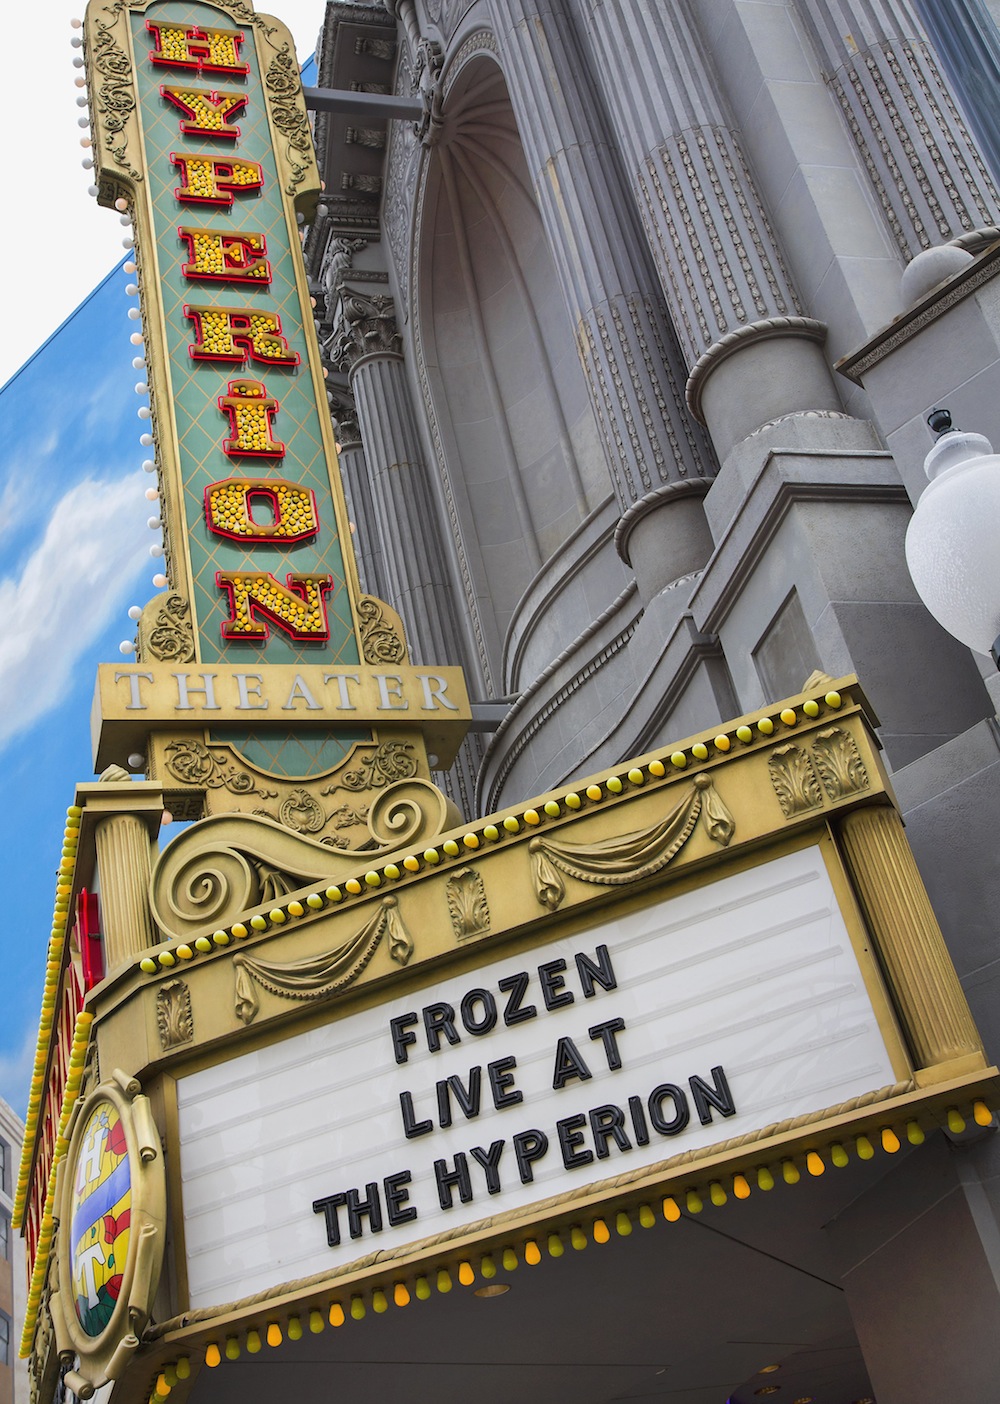 ‘FROZEN – LIVE AT THE HYPERION’ (March 4, 2016) – “Frozen – Live at the Hyperion,” a new musical based on the Walt Disney Animation Studios film “Frozen,” will open at the Hyperion Theater at Disney California Adventure Park on May 27, 2016. The new musical at the Disneyland Resort will immerse audiences in the emotional journey of Anna and Elsa in an entertaining musical adaptation that includes elaborate costumes and sets, special effects, new technologies, show-stopping production numbers and unique theatrical surprises. (Paul Hiffmeyer/Disneyland Resort)